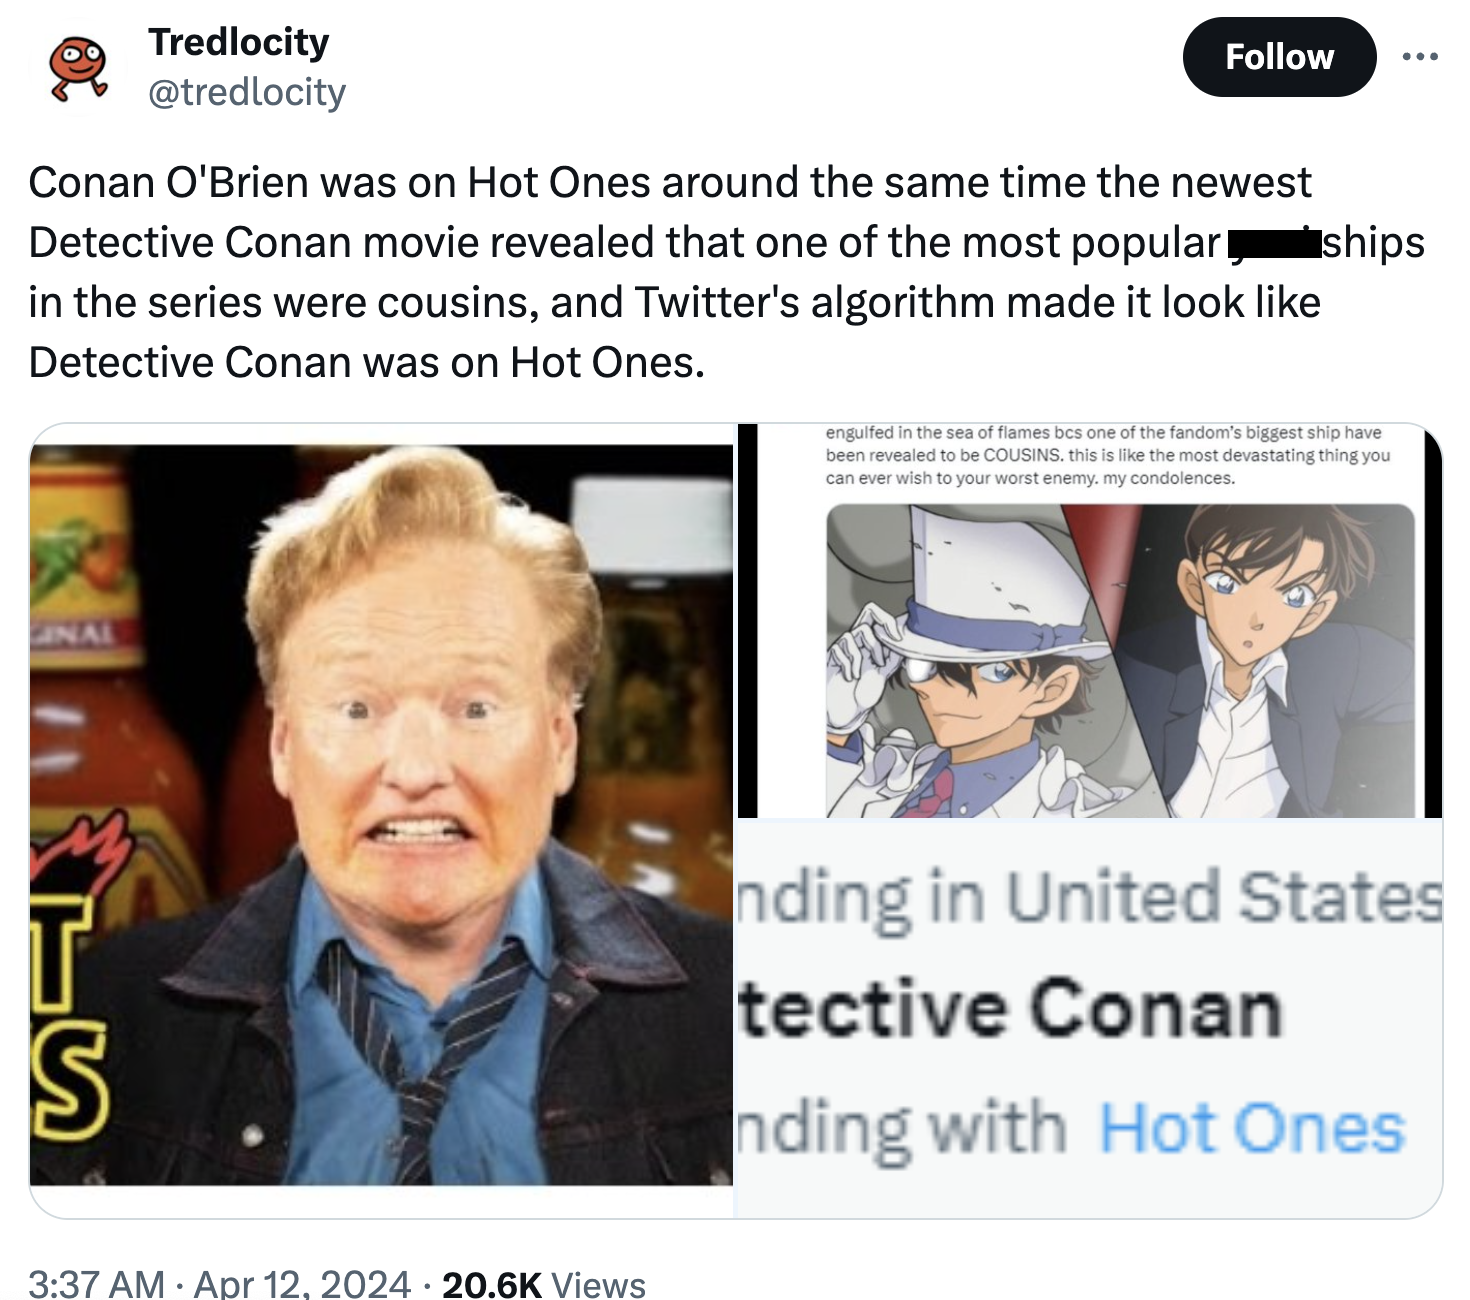 photo caption - Tredlocity Conan O'Brien was on Hot Ones around the same time the newest Detective Conan movie revealed that one of the most popular ships in the series were cousins, and Twitter's algorithm made it look Detective Conan was on Hot Ones. Na